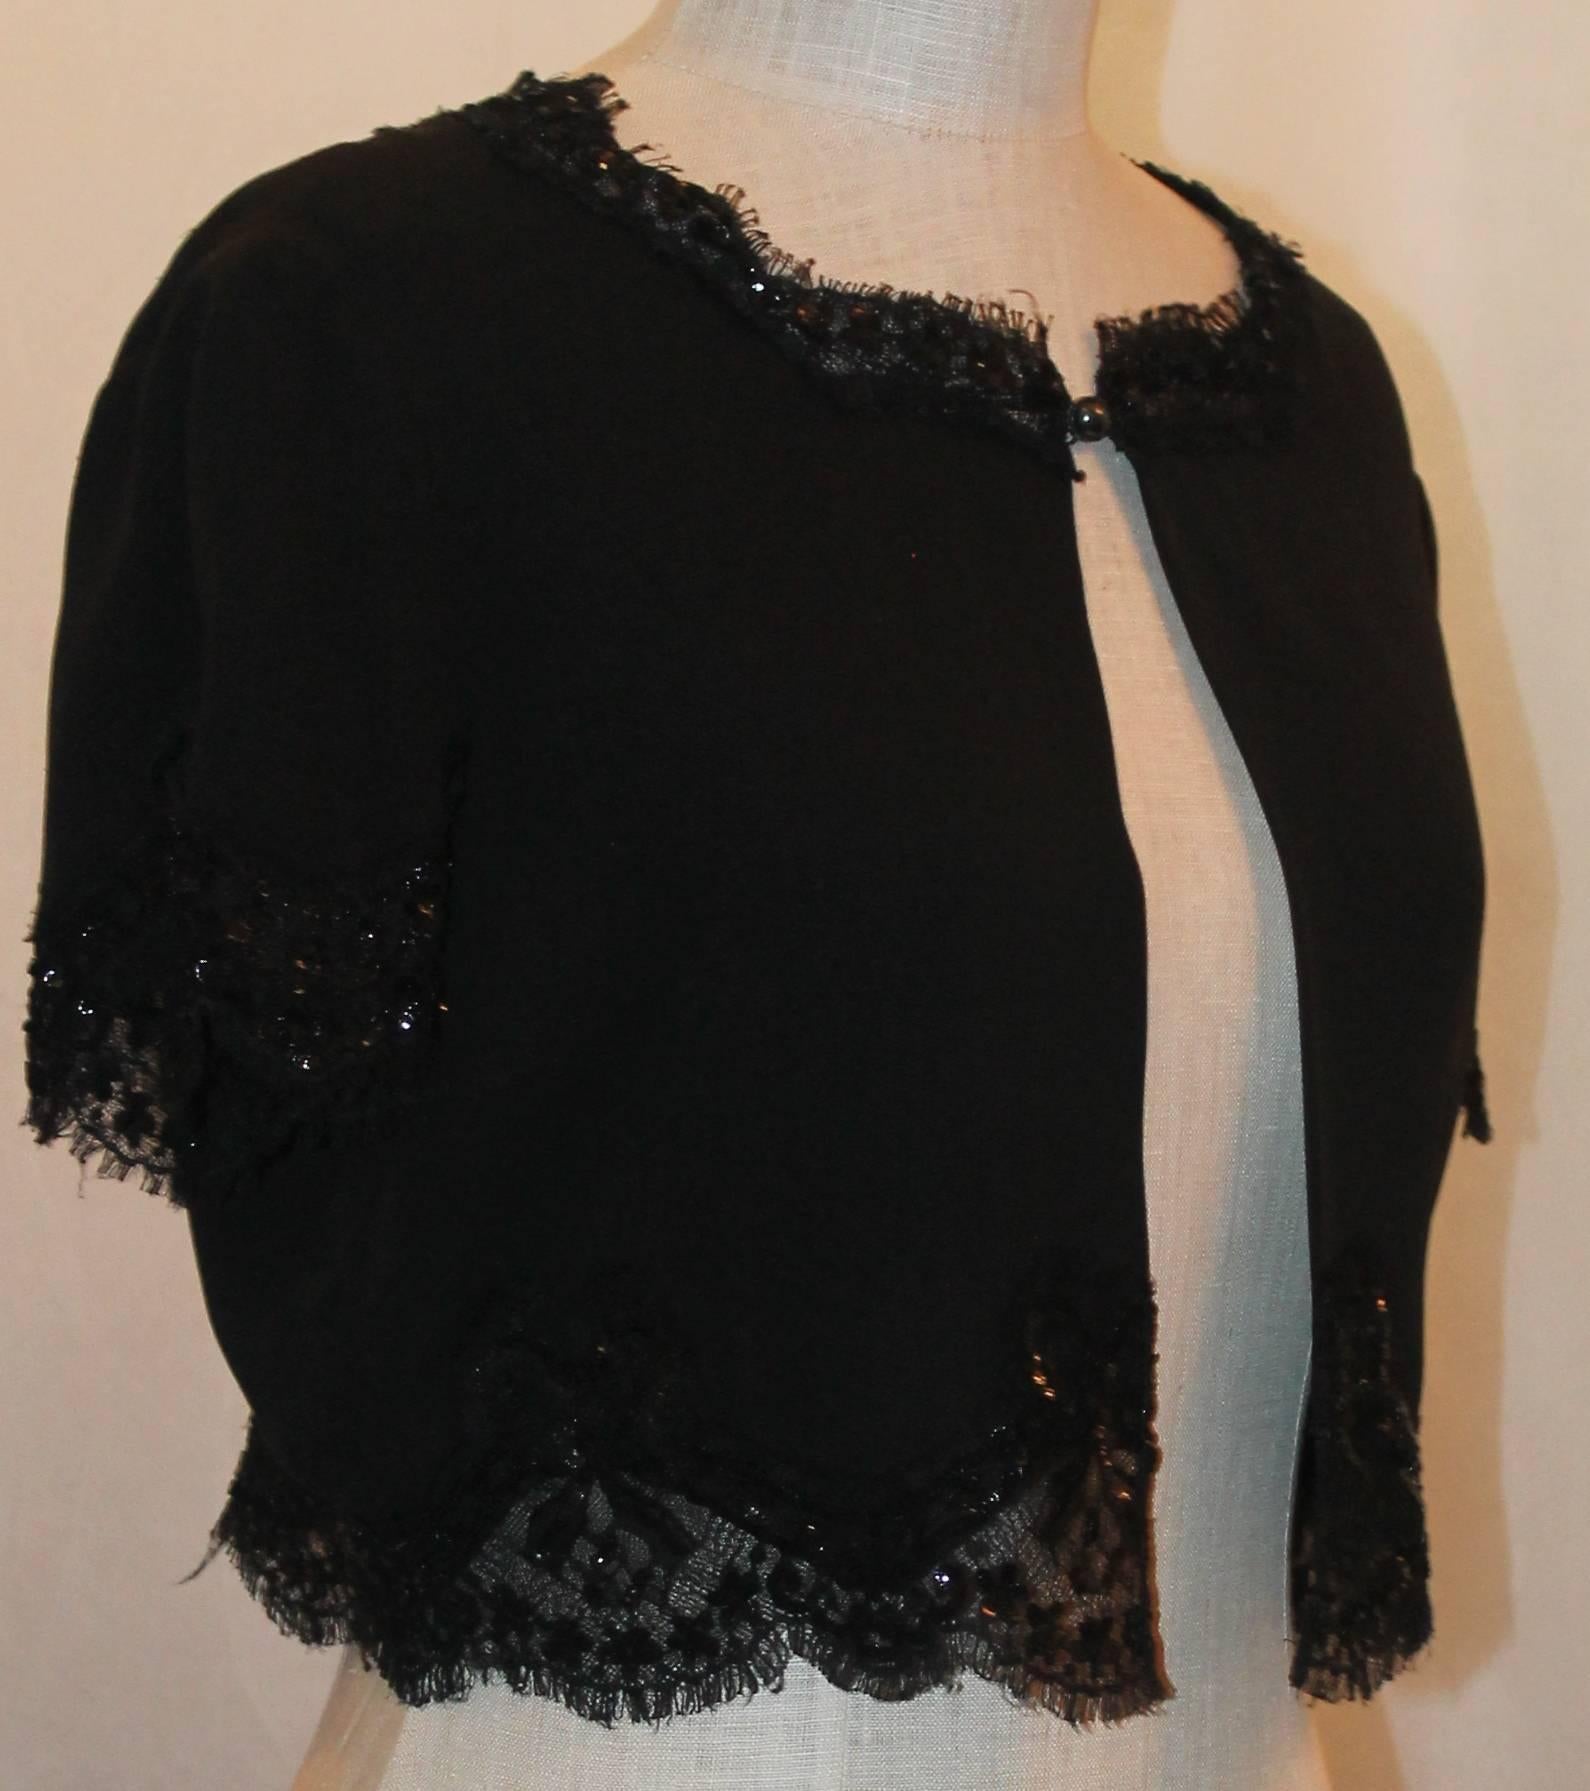 Chanel Black Silk Short Sleeve Bolero w/ Lace & Sequin Trim - 40.  This beautiful bolero has intricate lace and sequin detail along the trim.  it has one single button at the top center w/ a charcoal colored pearl w/ the "CC" mark on